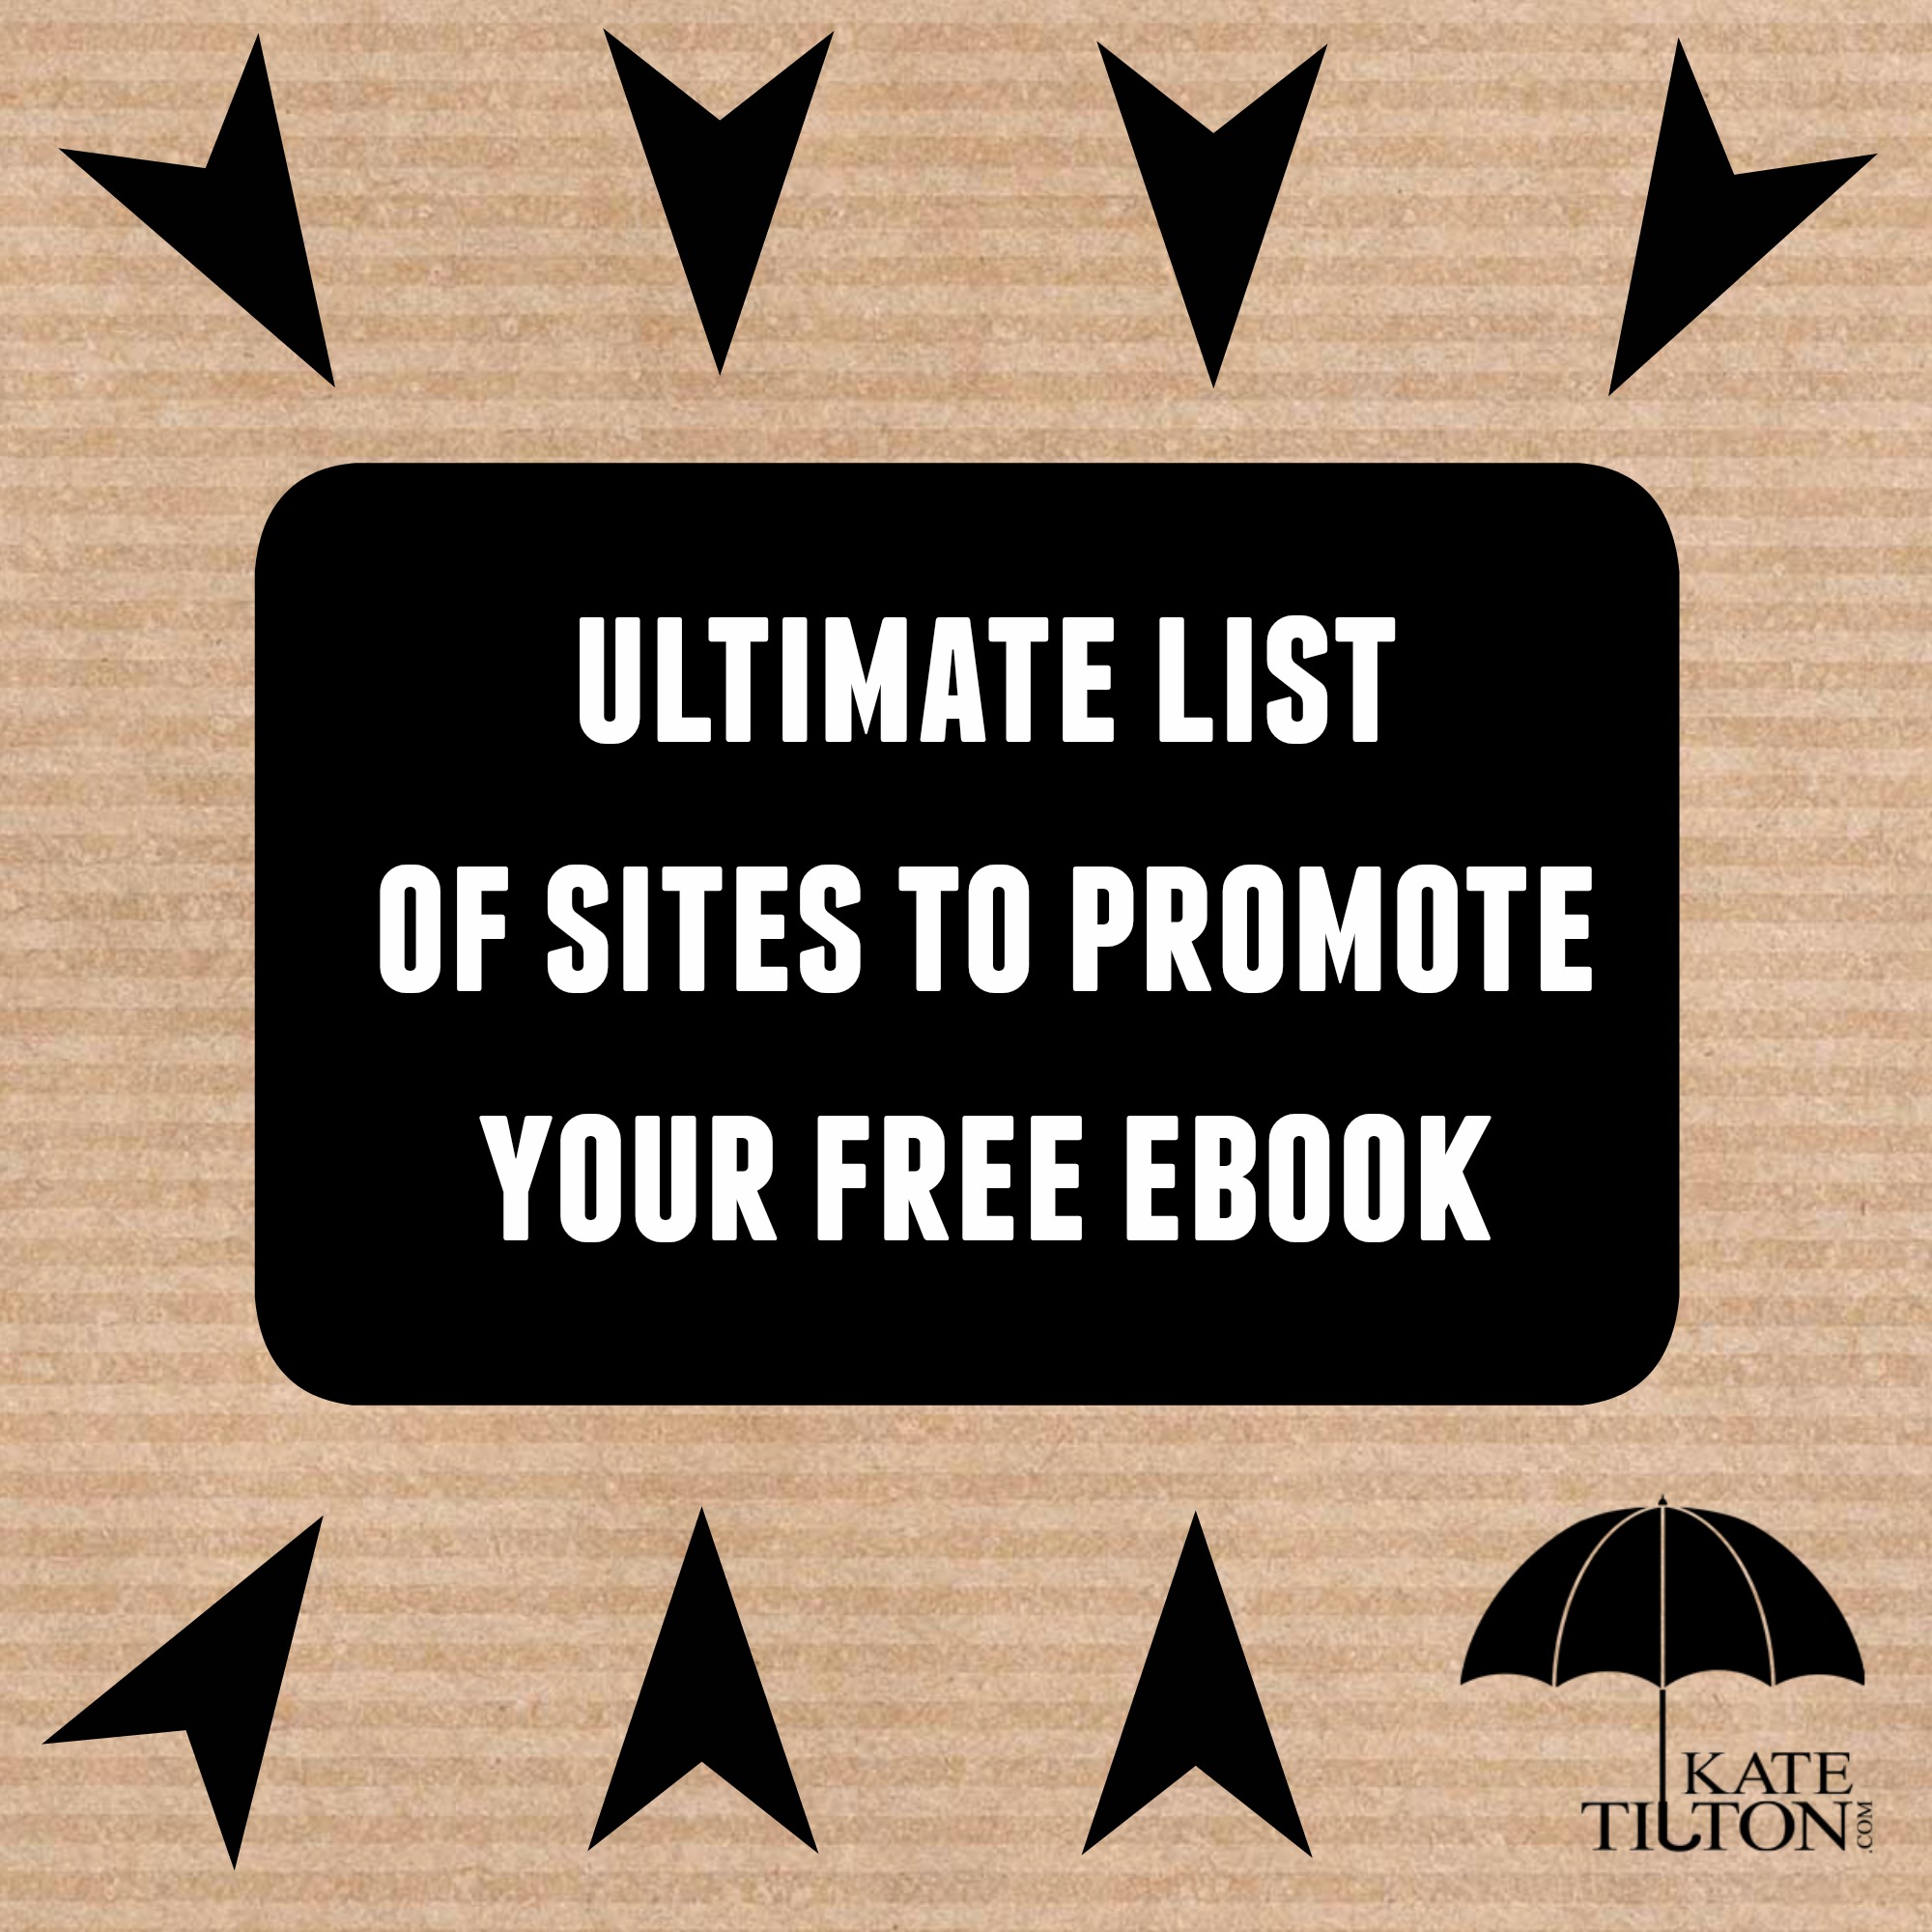 Ultimate List of Sites to Promote Your Free eBook